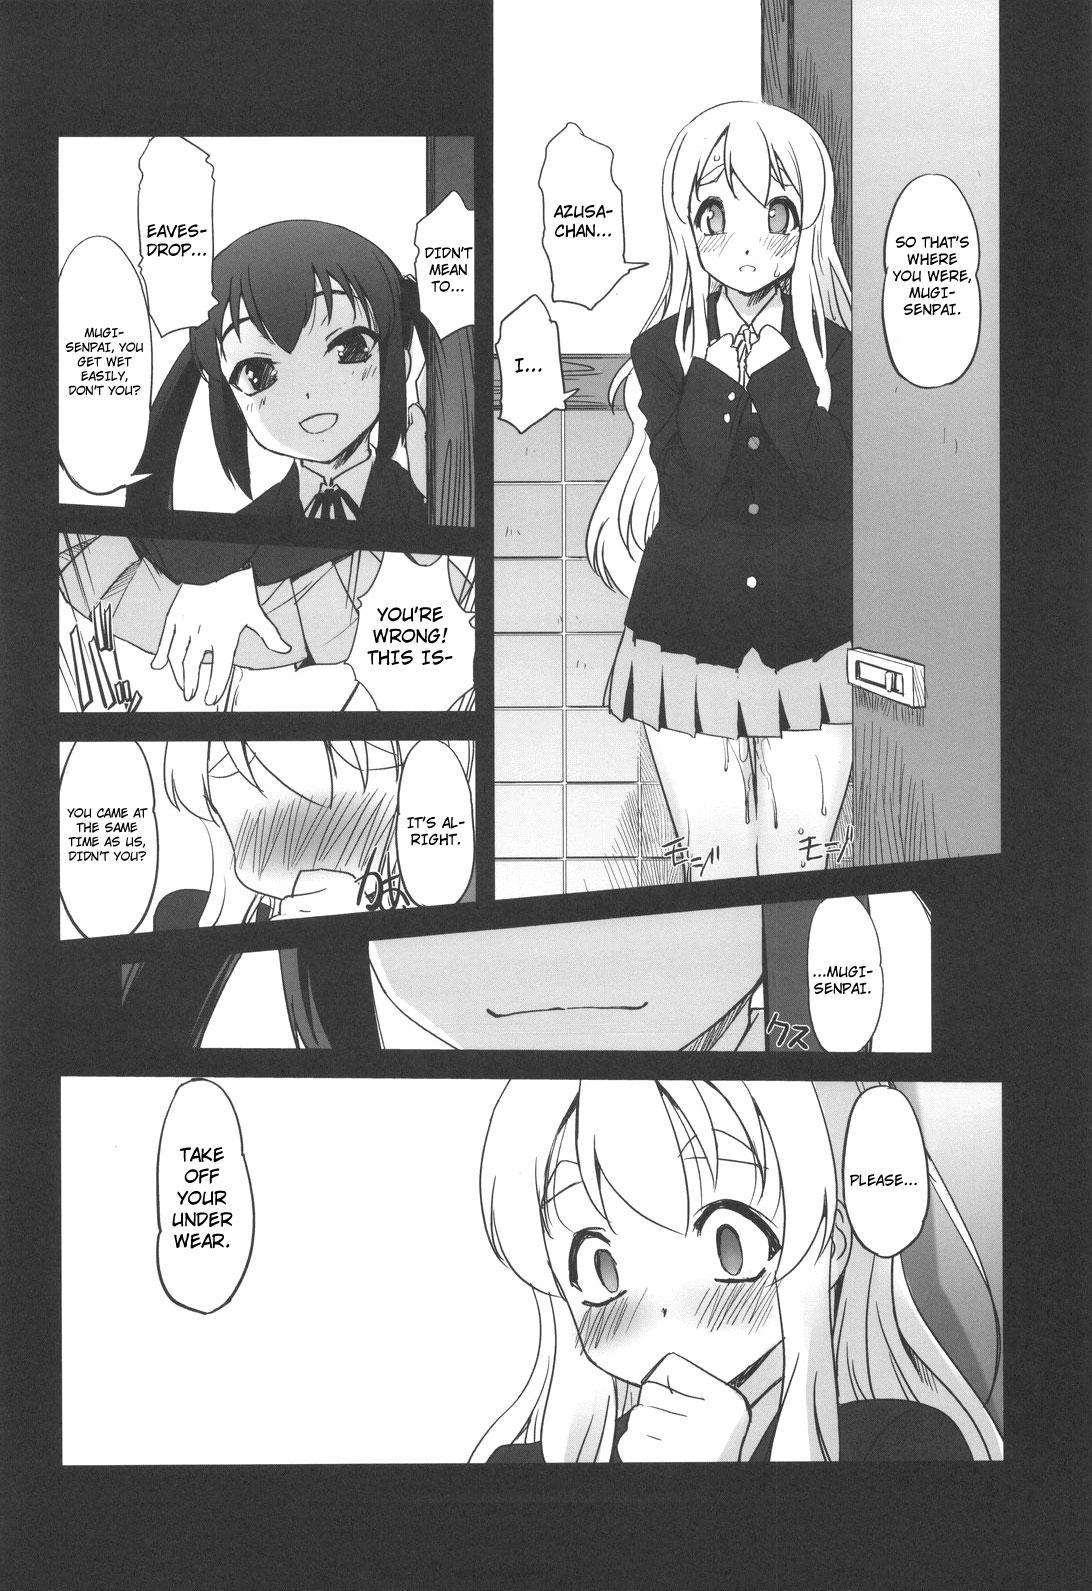 Nekomimi to Toilet to Houkago no Bushitsu | Cat Ears And A Restroom And The Club Room After School 17